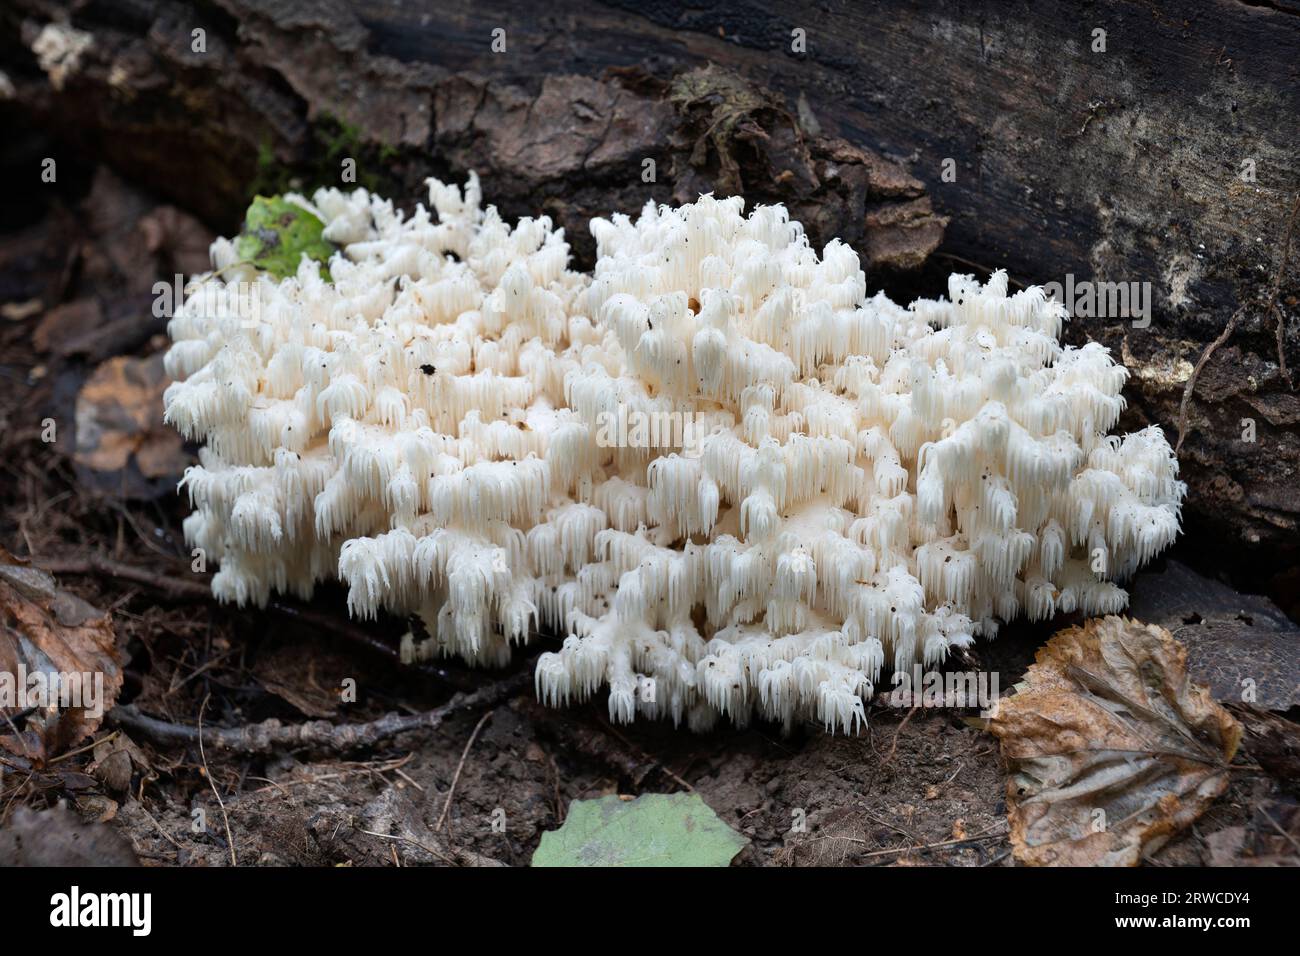 Edible mushrooms growing in the autumn forest. Herícium coralloídes. Stock Photo